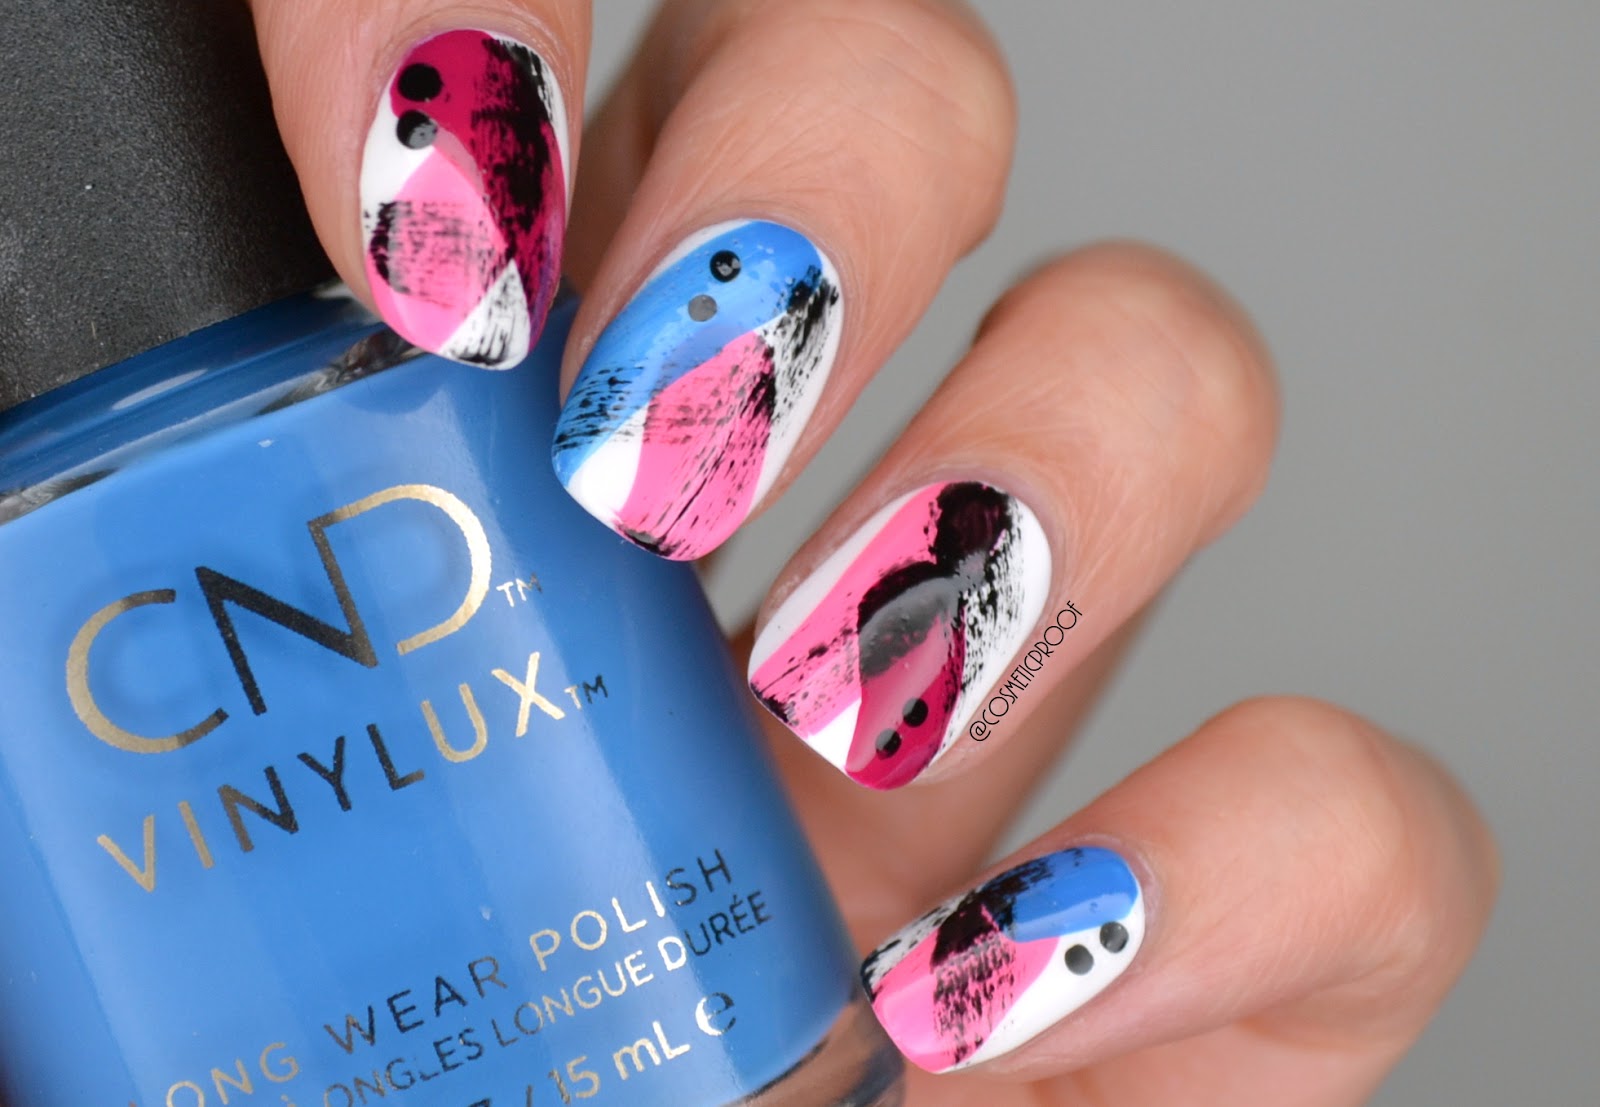 9. "Nail Art with Abstract Faces" - wide 2